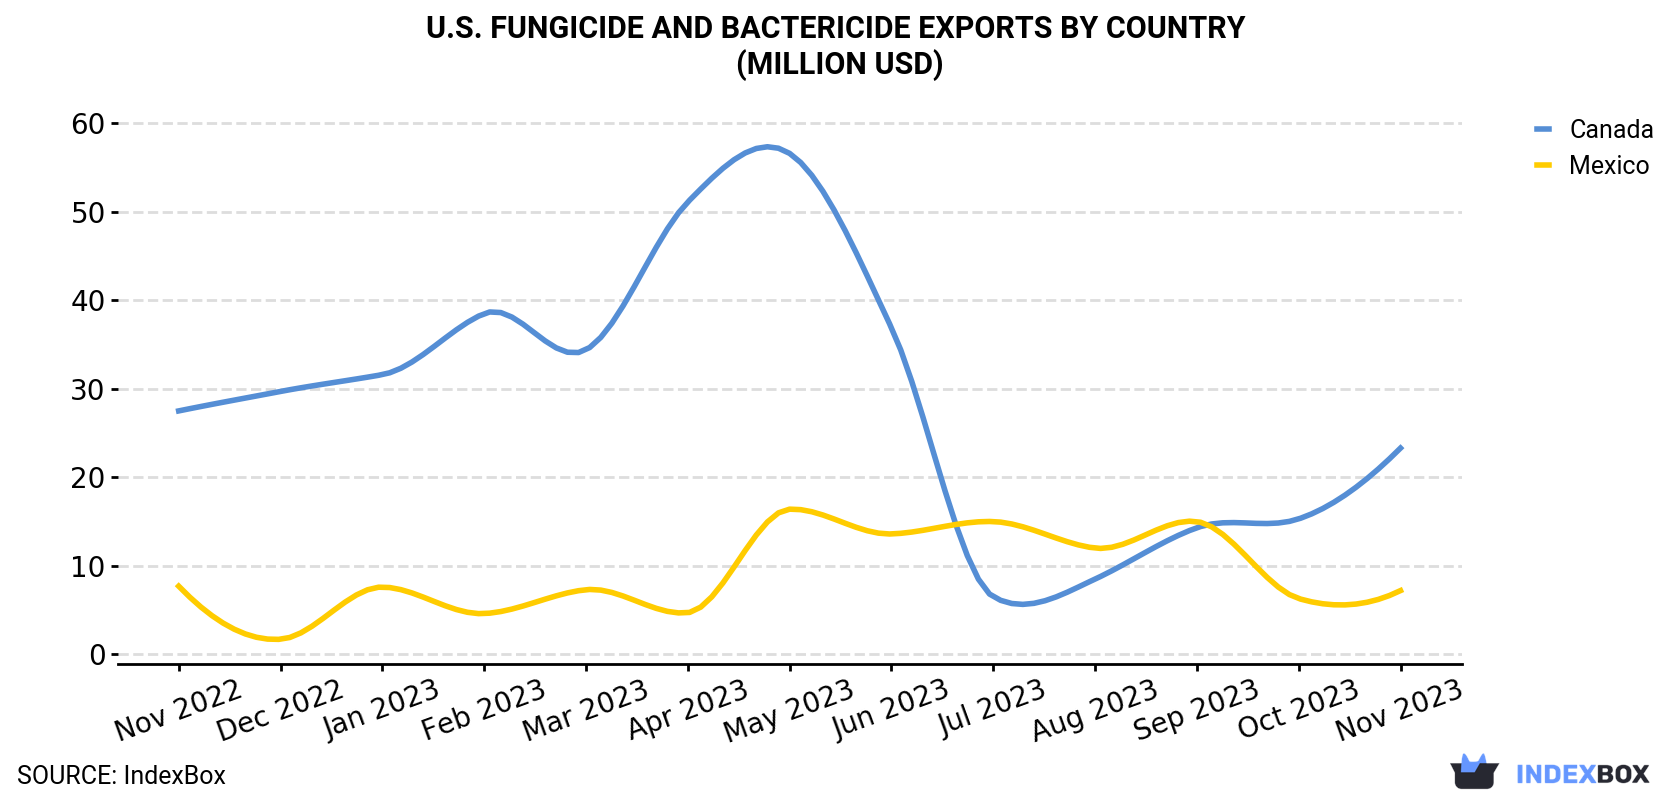 U.S. Fungicide And Bactericide Exports By Country (Million USD)